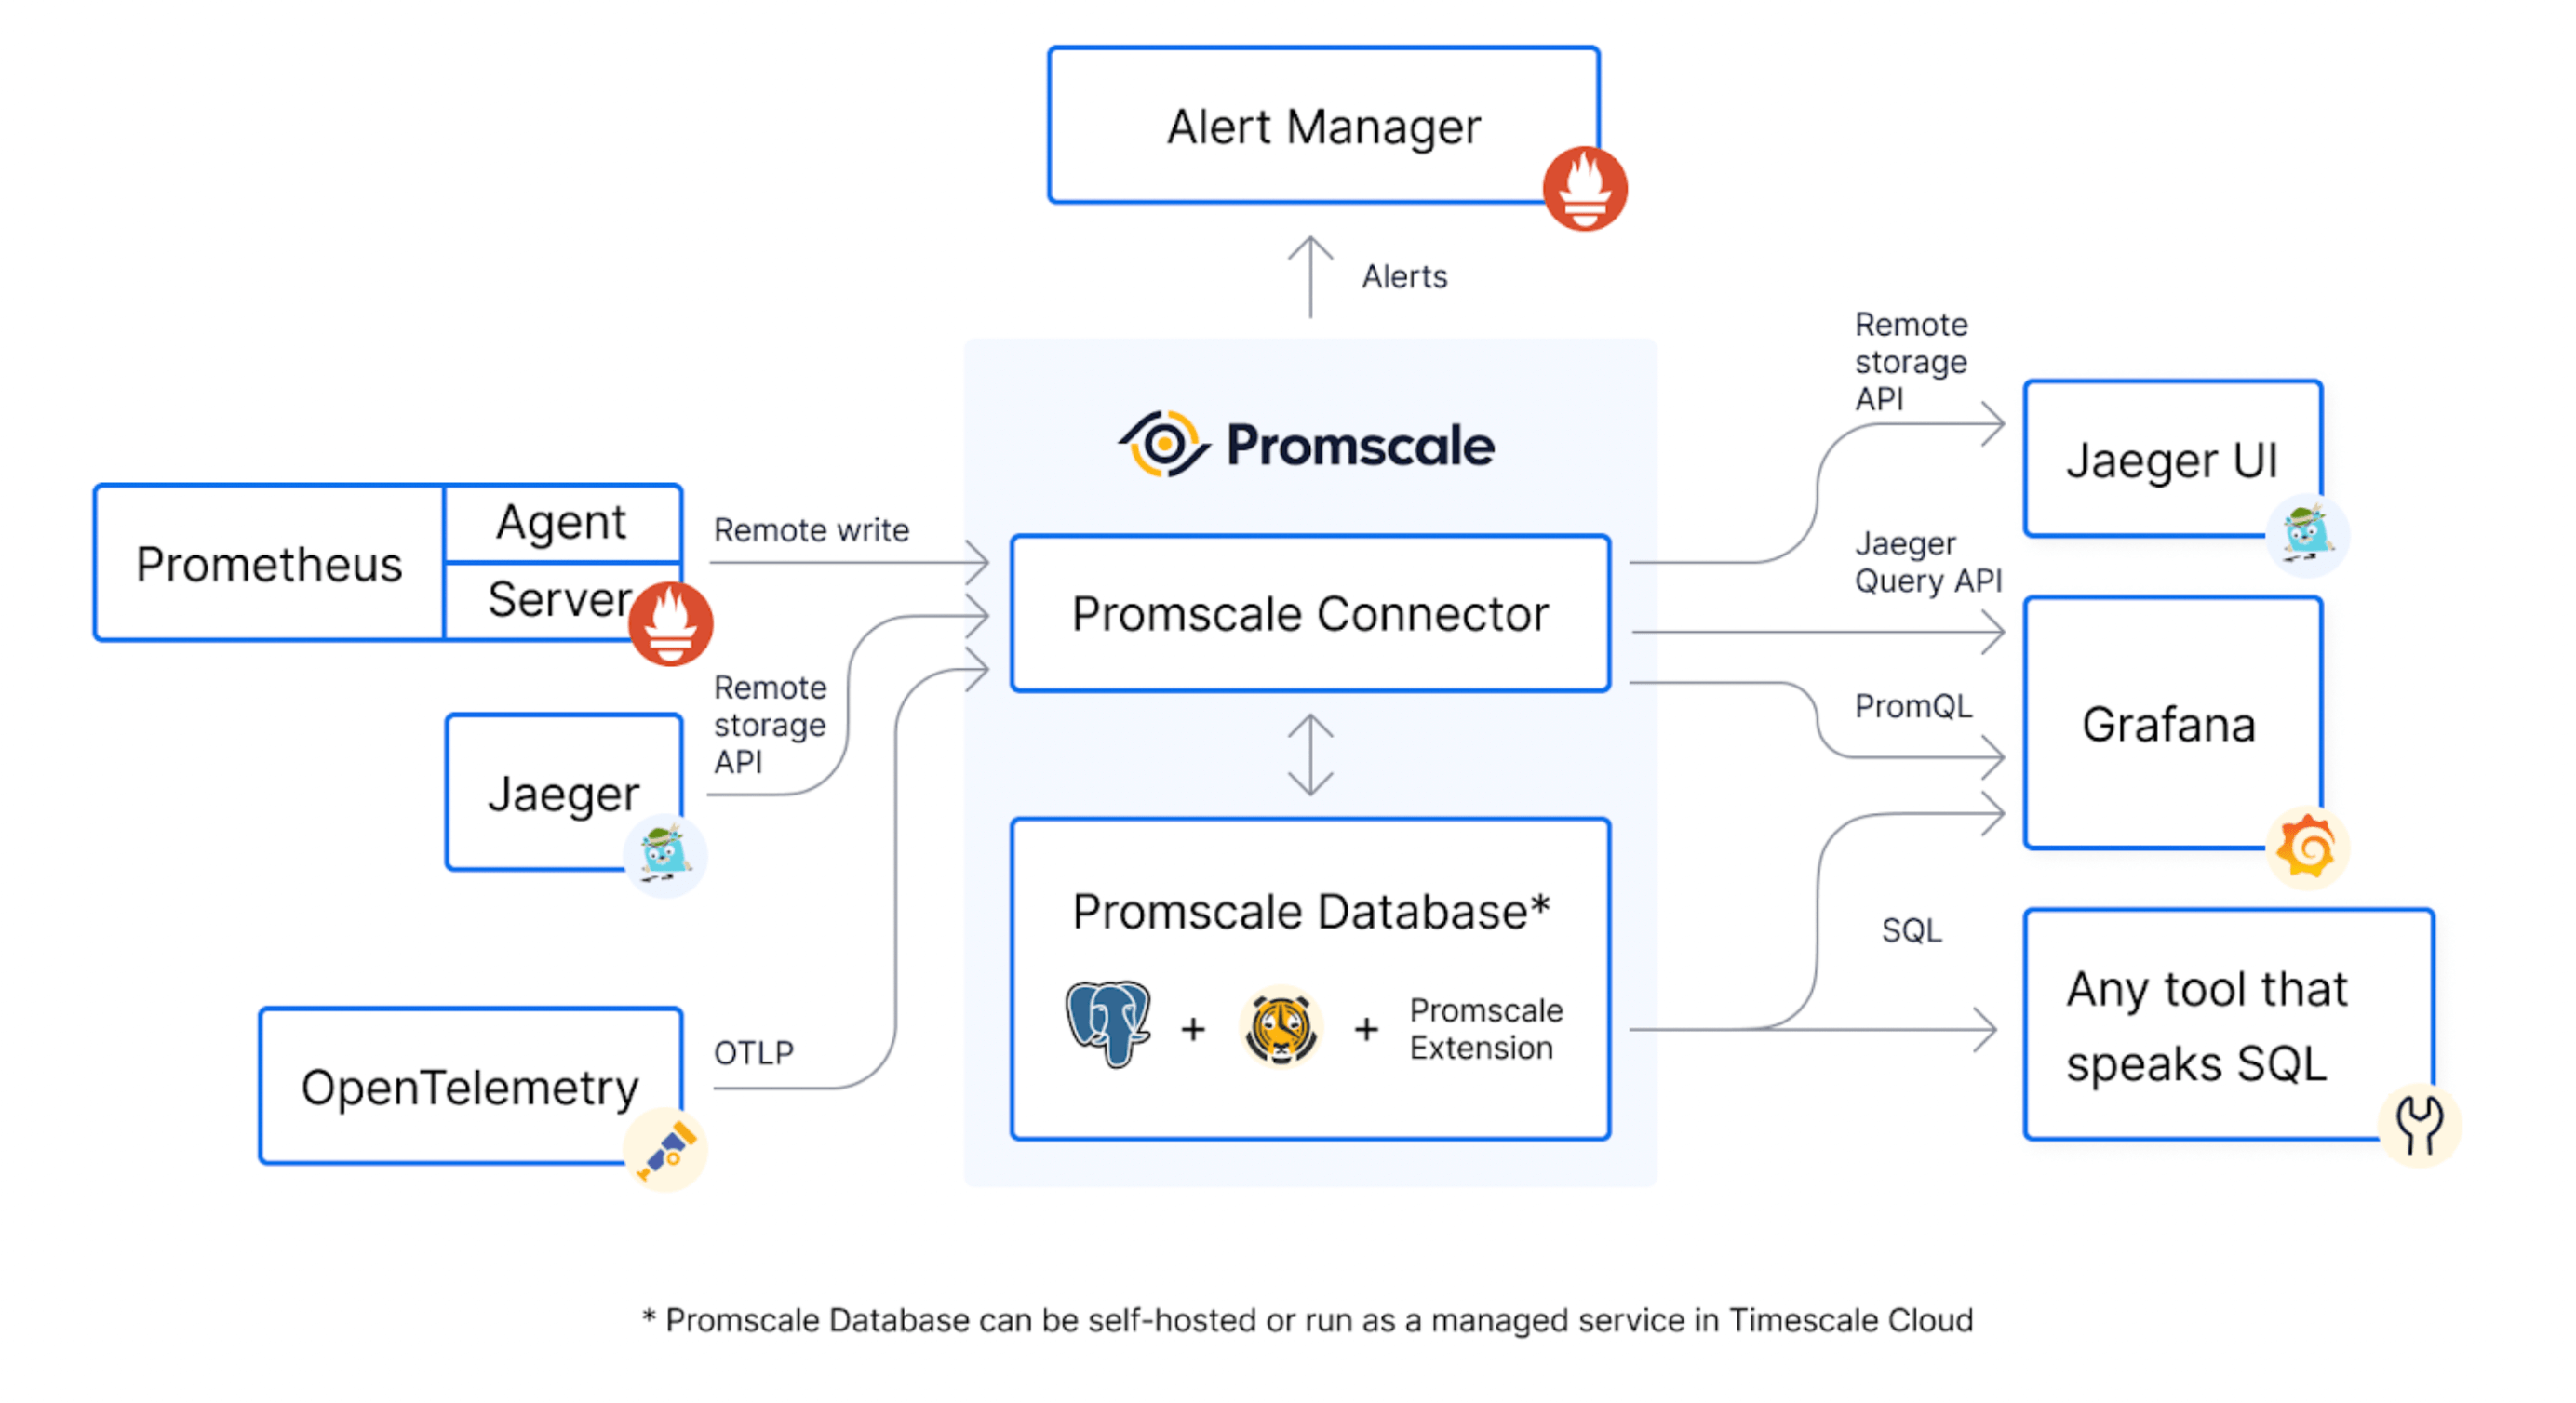 A high-level diagram of the Promscale architecture